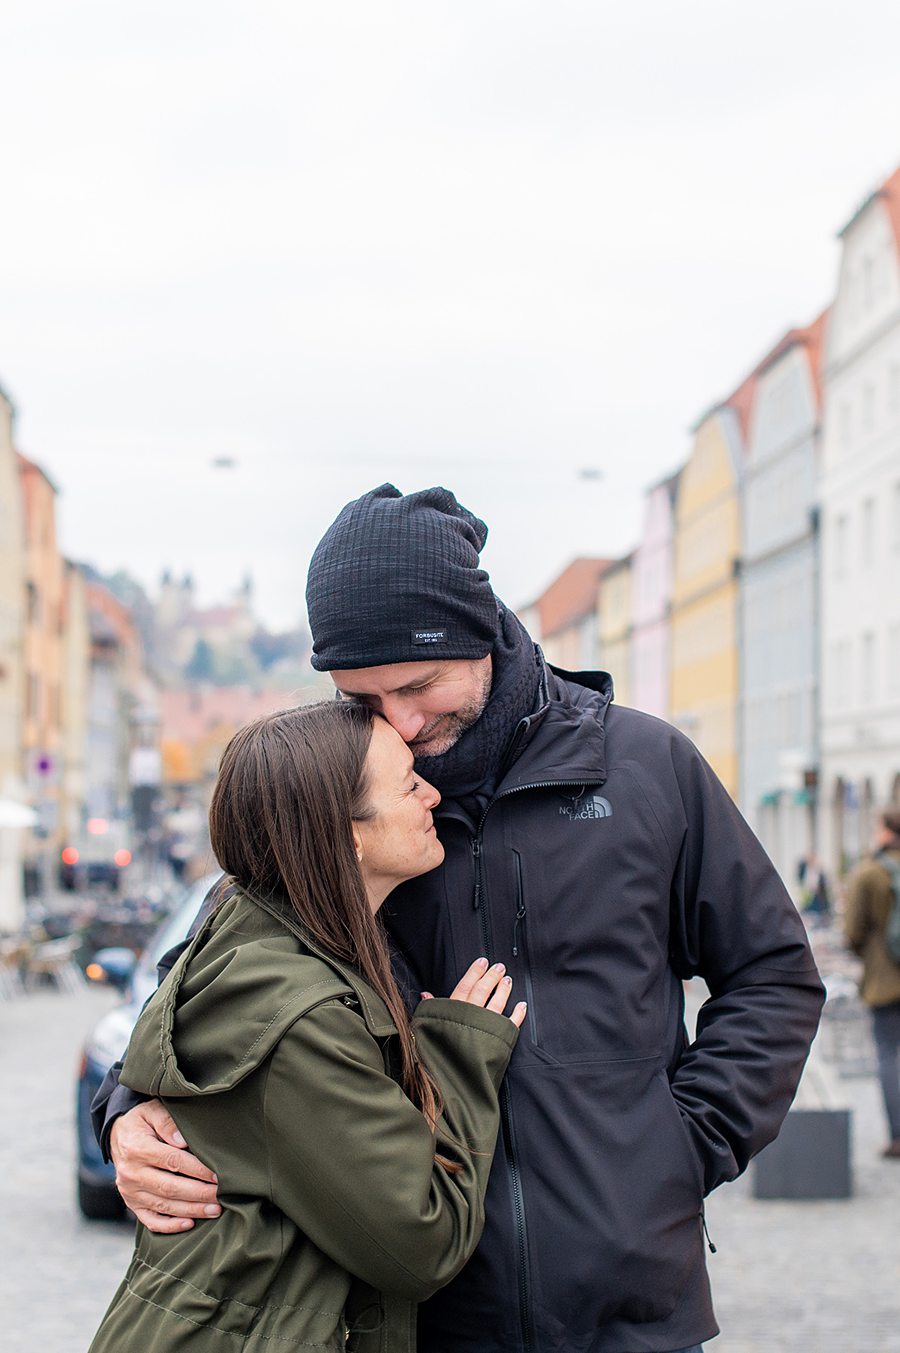 Couple sharing a moment on a street in Regensberg Germany.